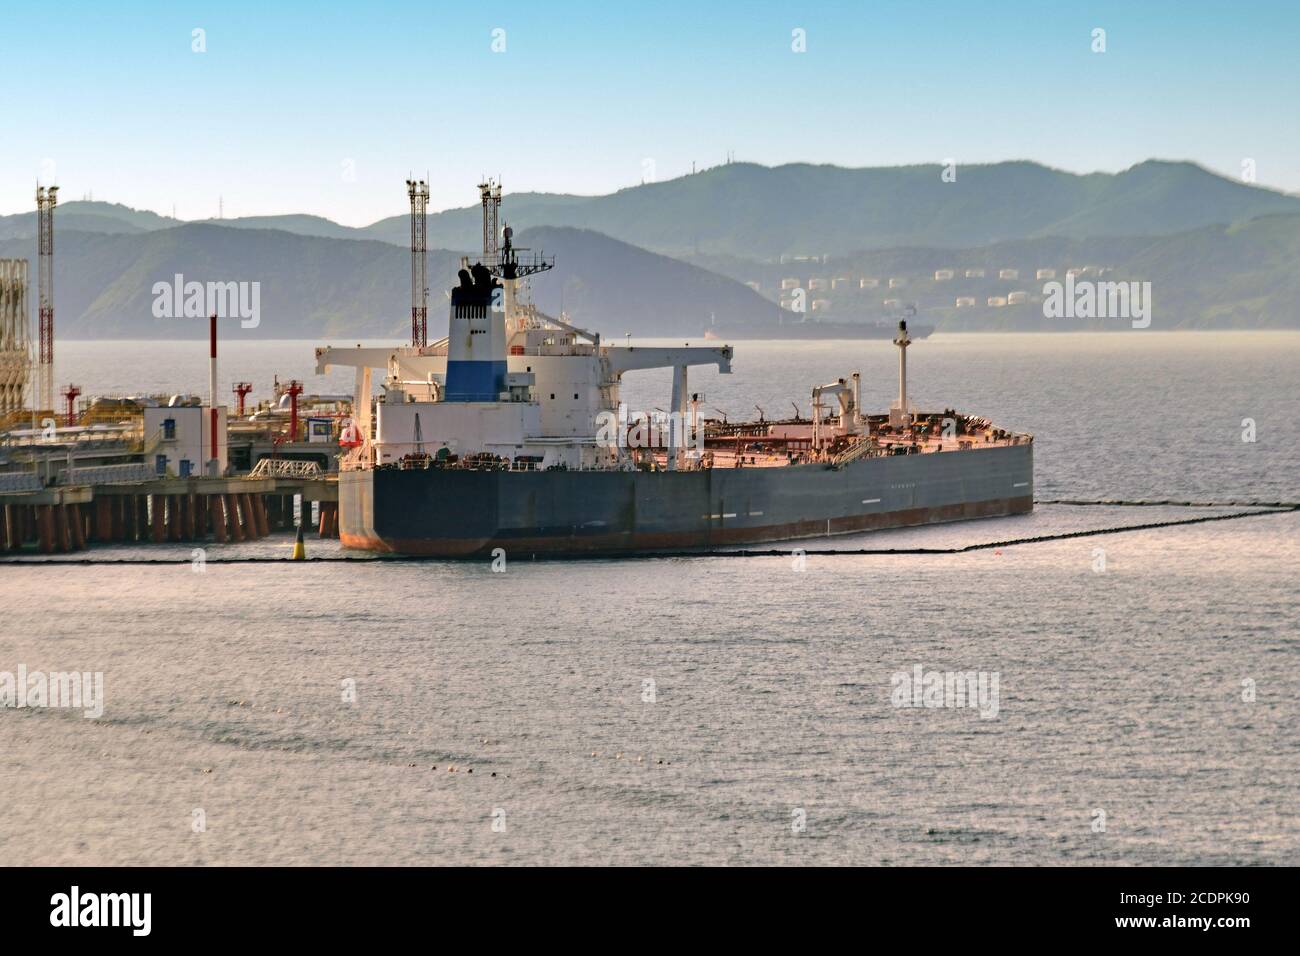 loading chemical tankers in the port Stock Photo